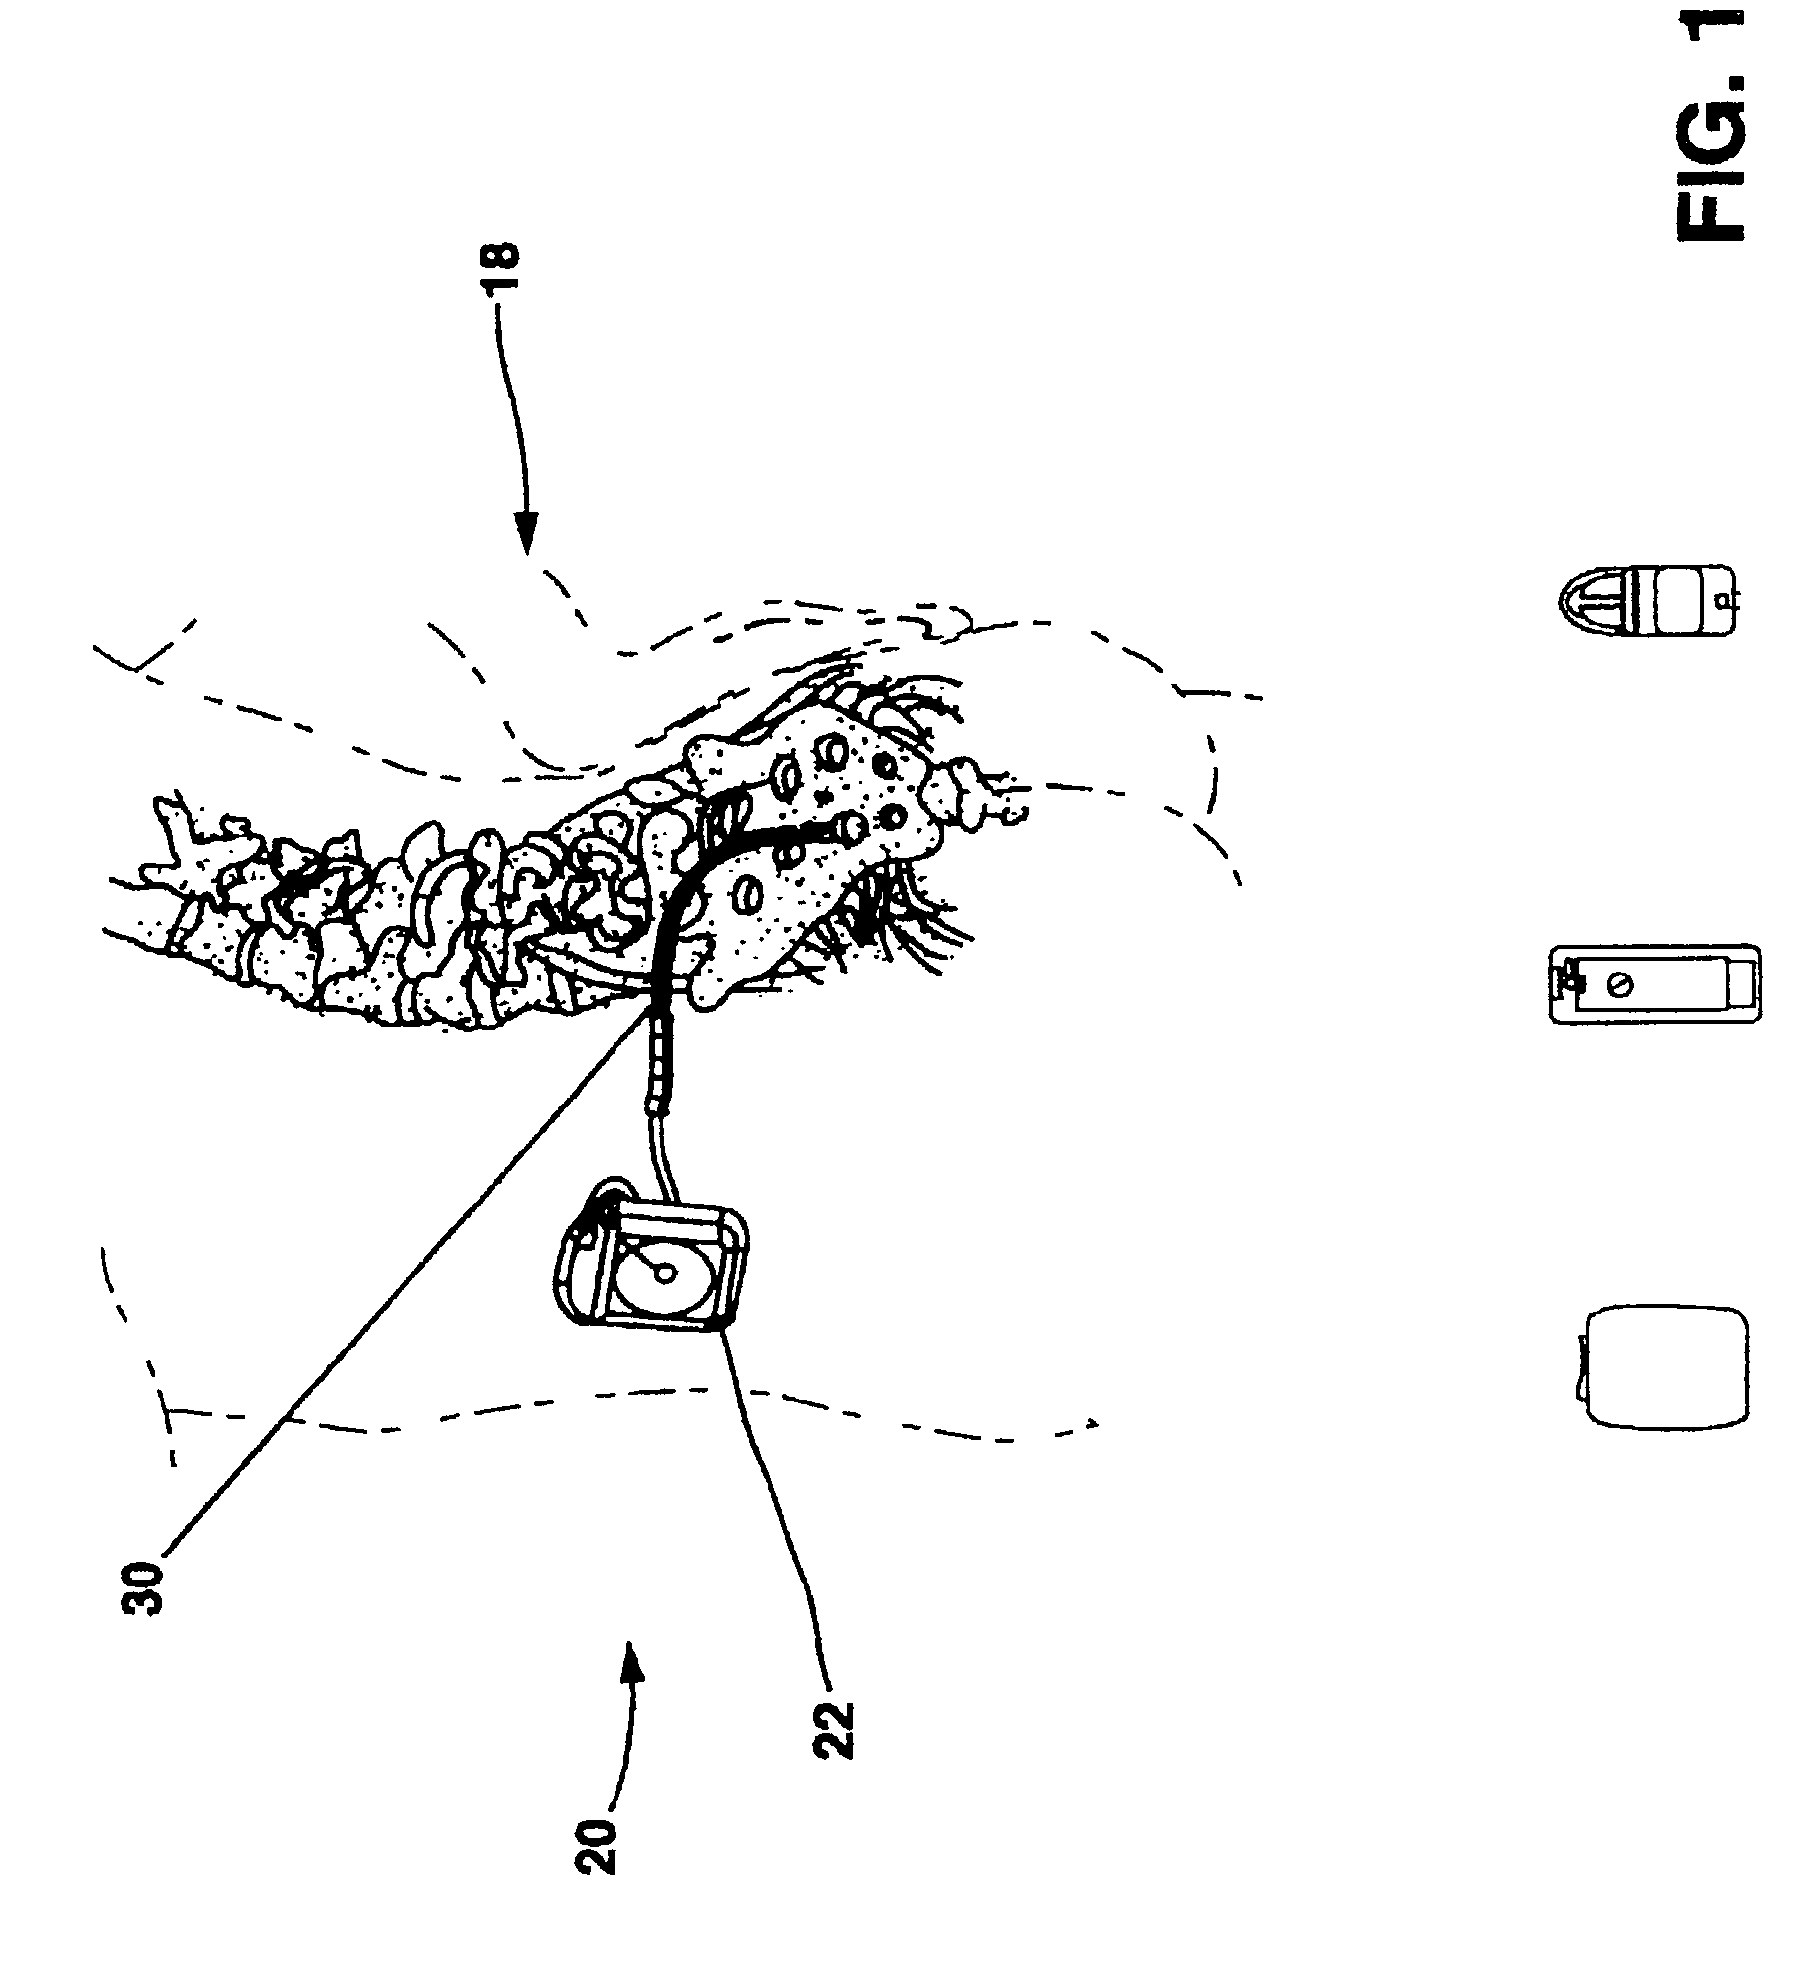 Method for performing a coplanar connection between a conductor and a contact on an implantable lead